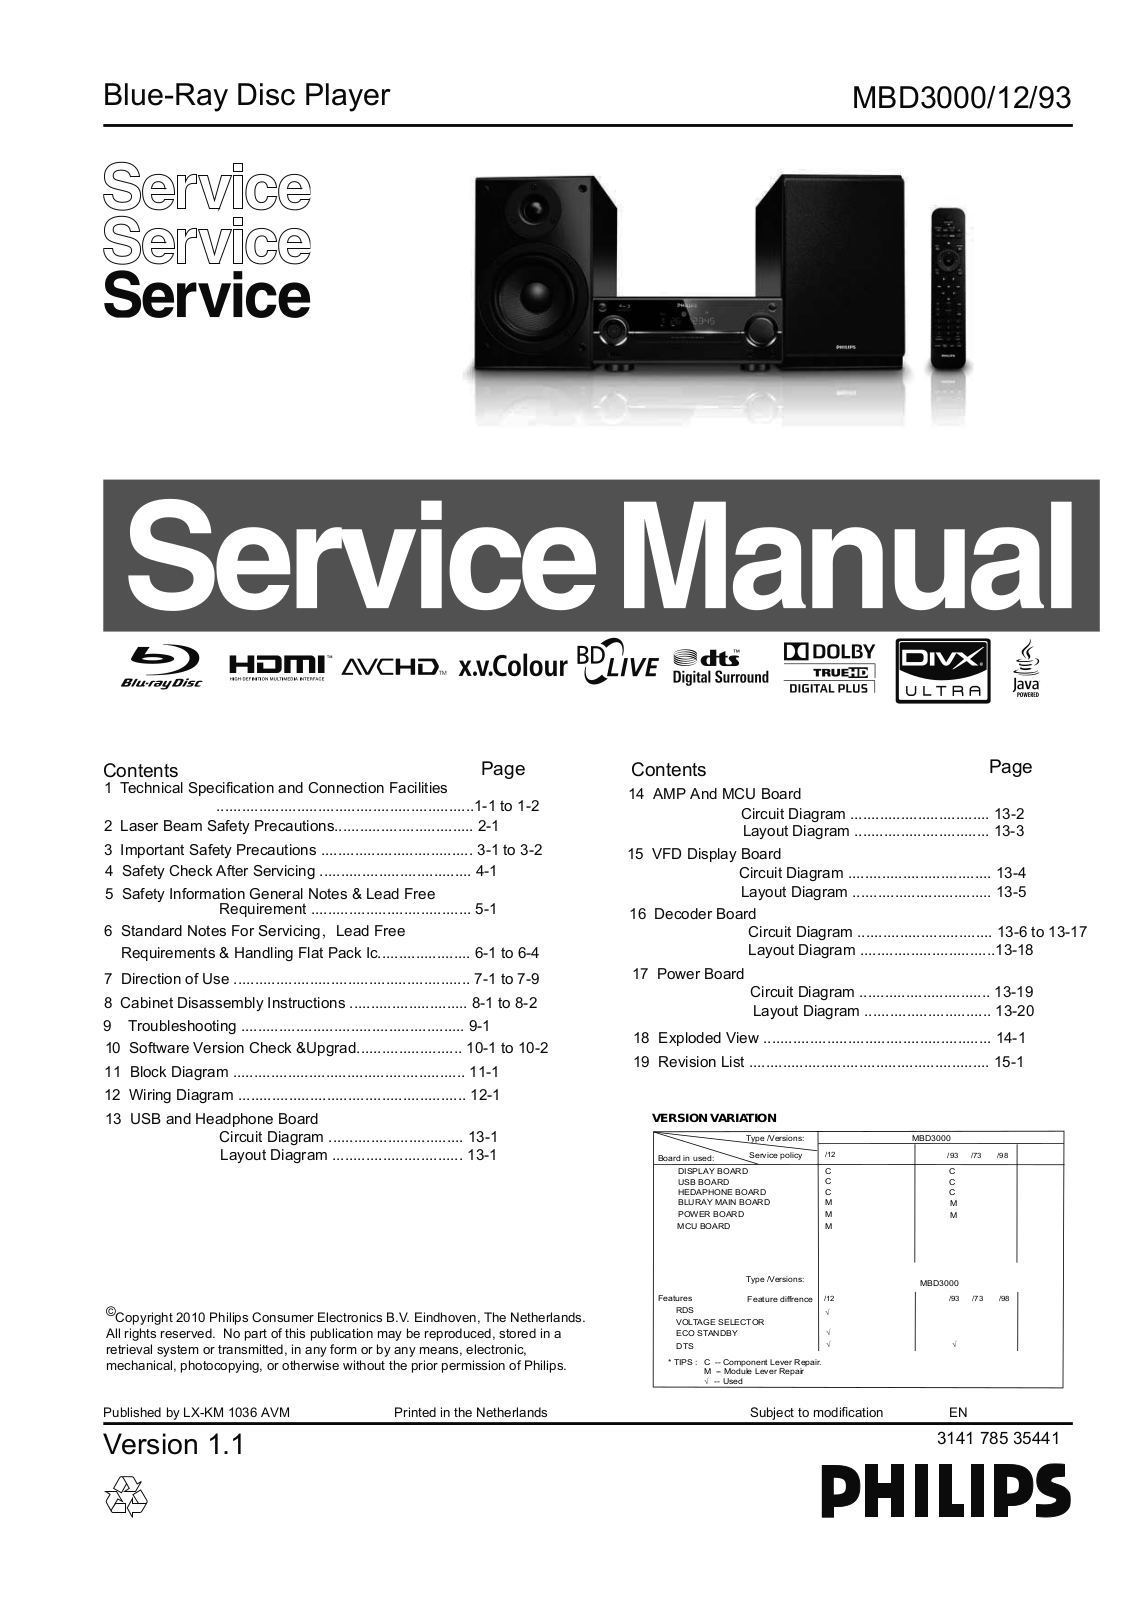 Philips MBD-3000 Service Manual